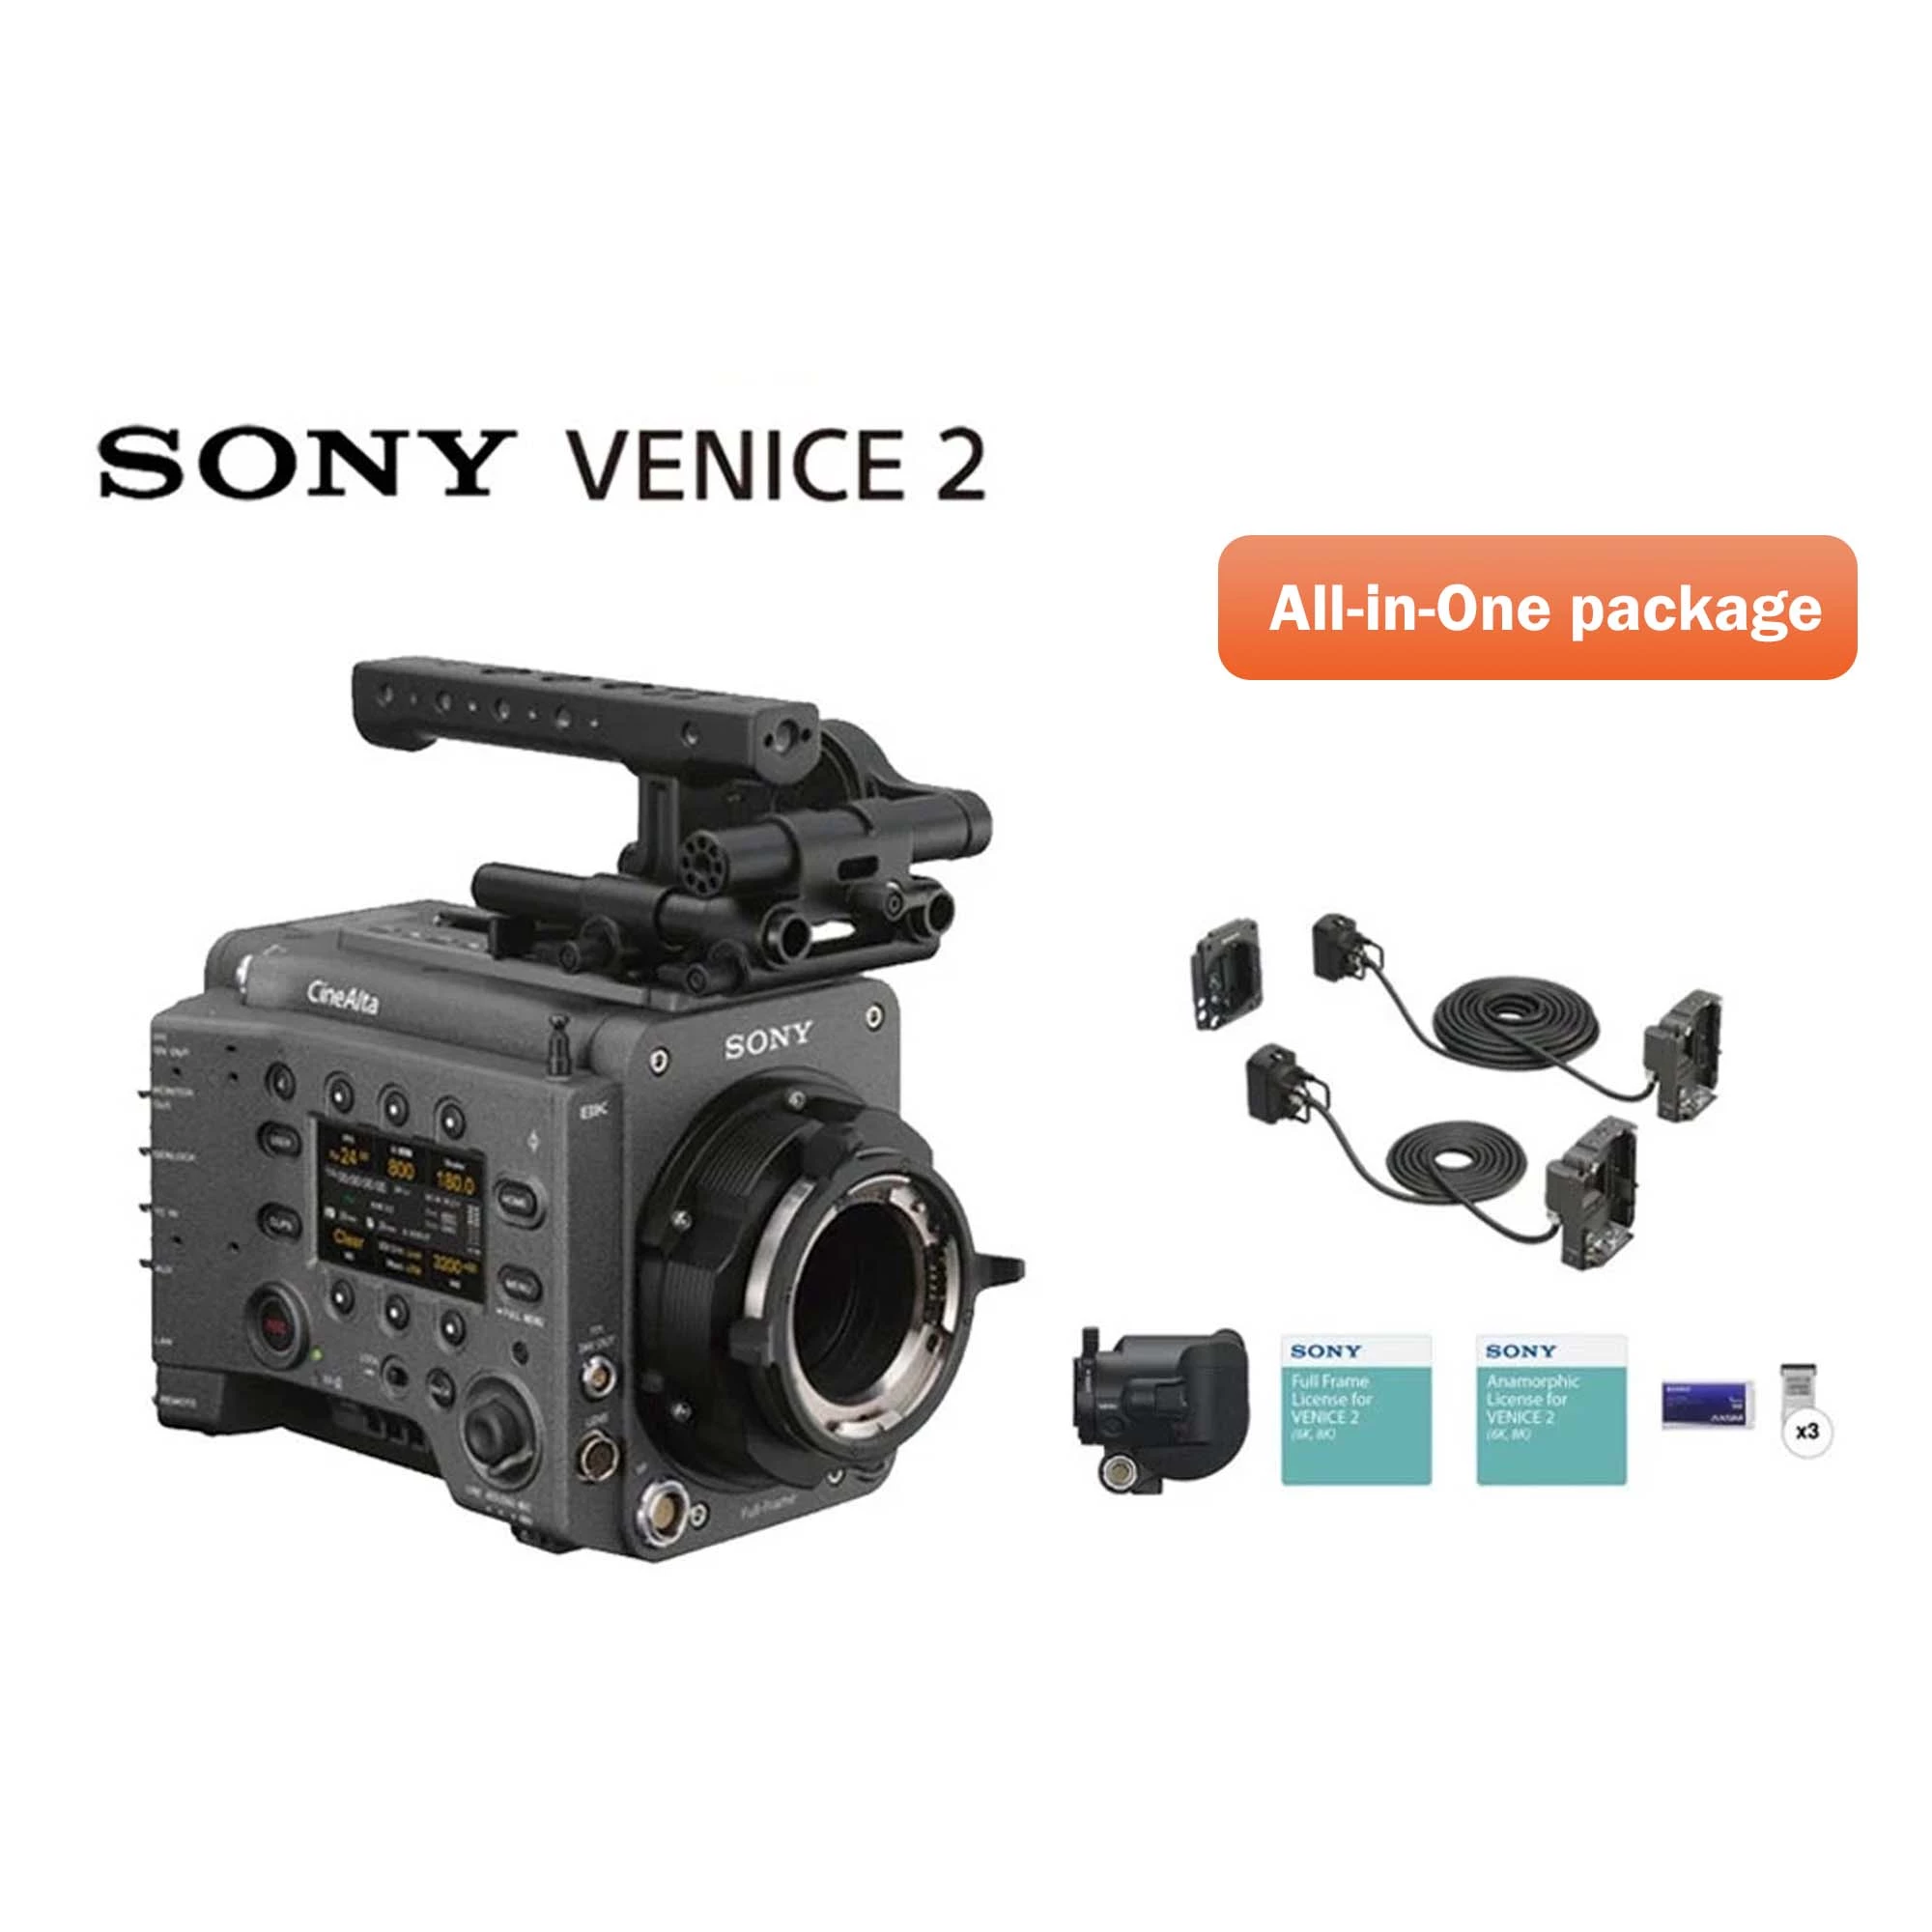 Sony Venice 2 All-in-One Package